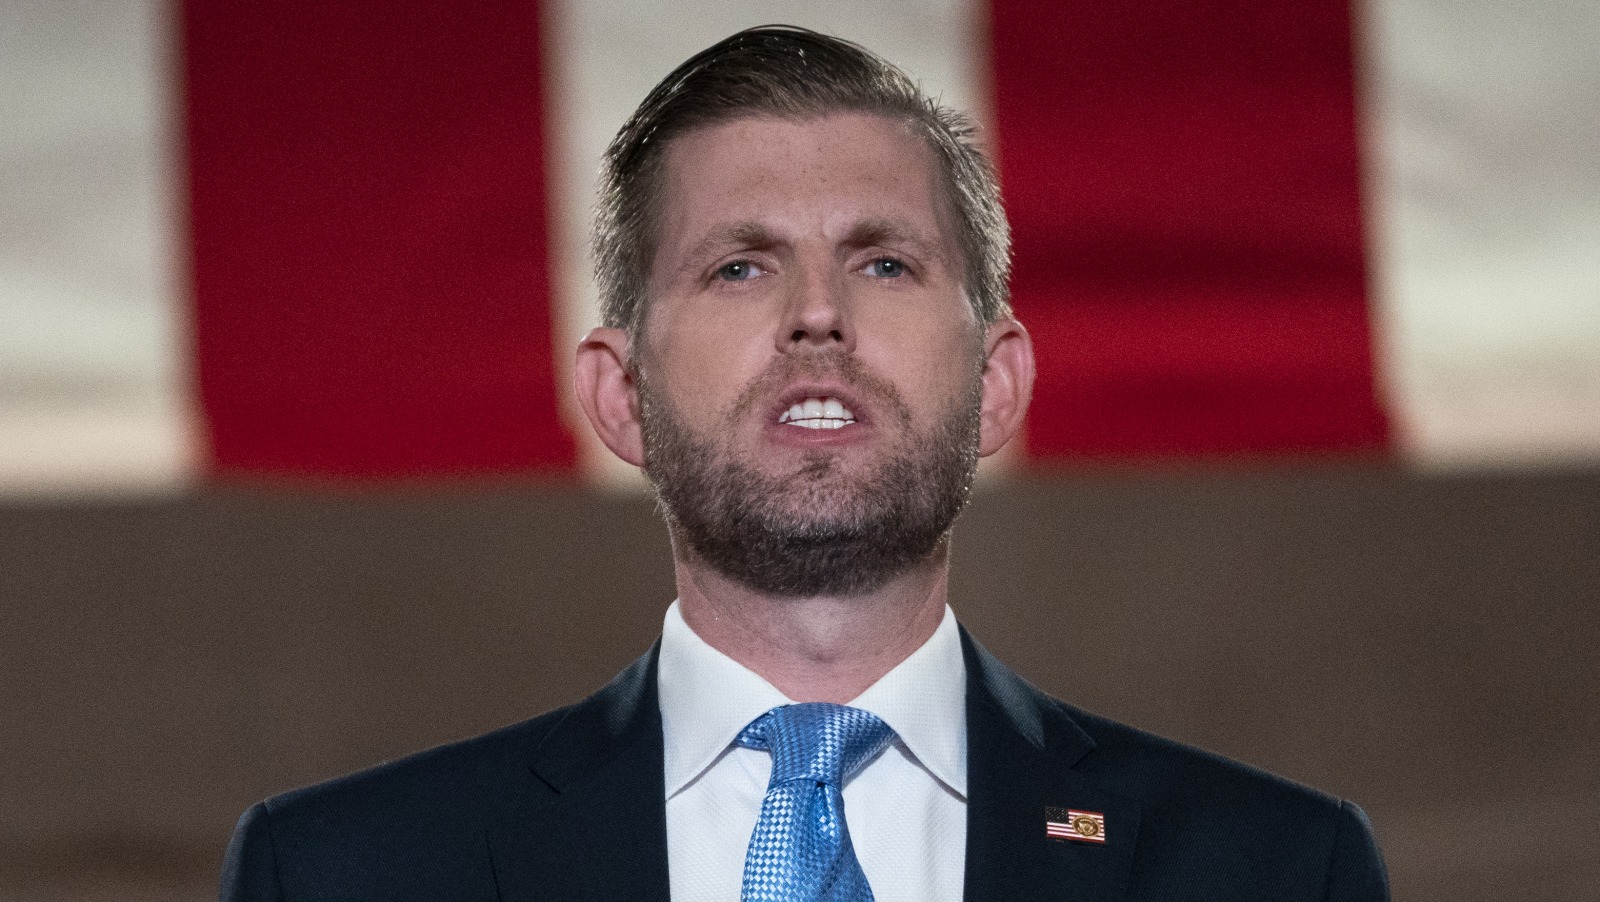 Why This Video Shared By Eric Trump Has People Furious